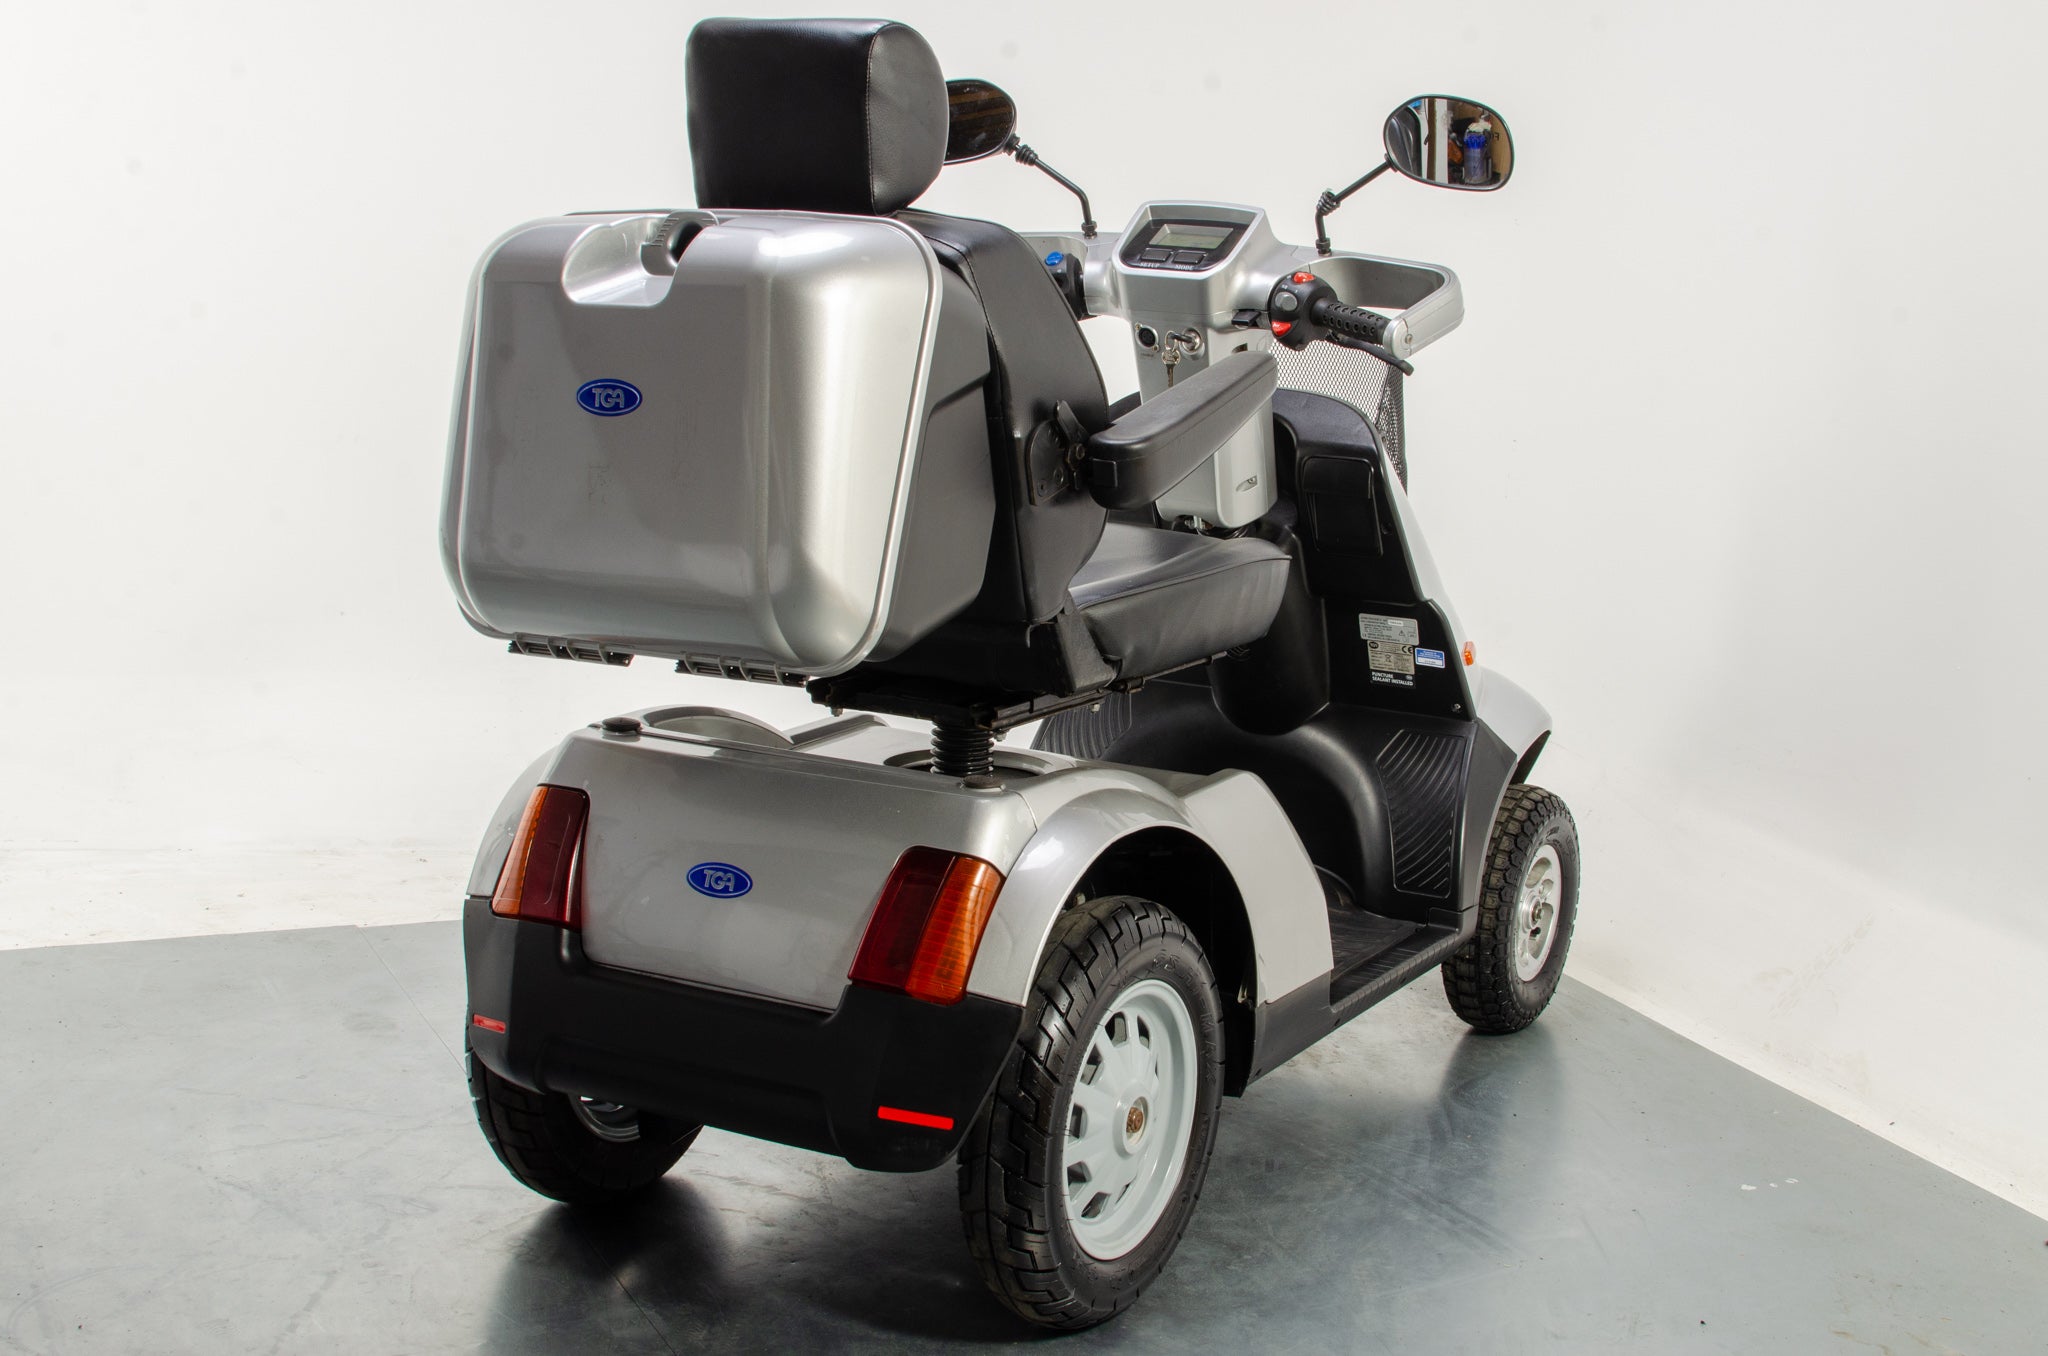 TGA Breeze S4 Used Mobility Scooter 8mph Large All-Terrain Road Legal Off-Road